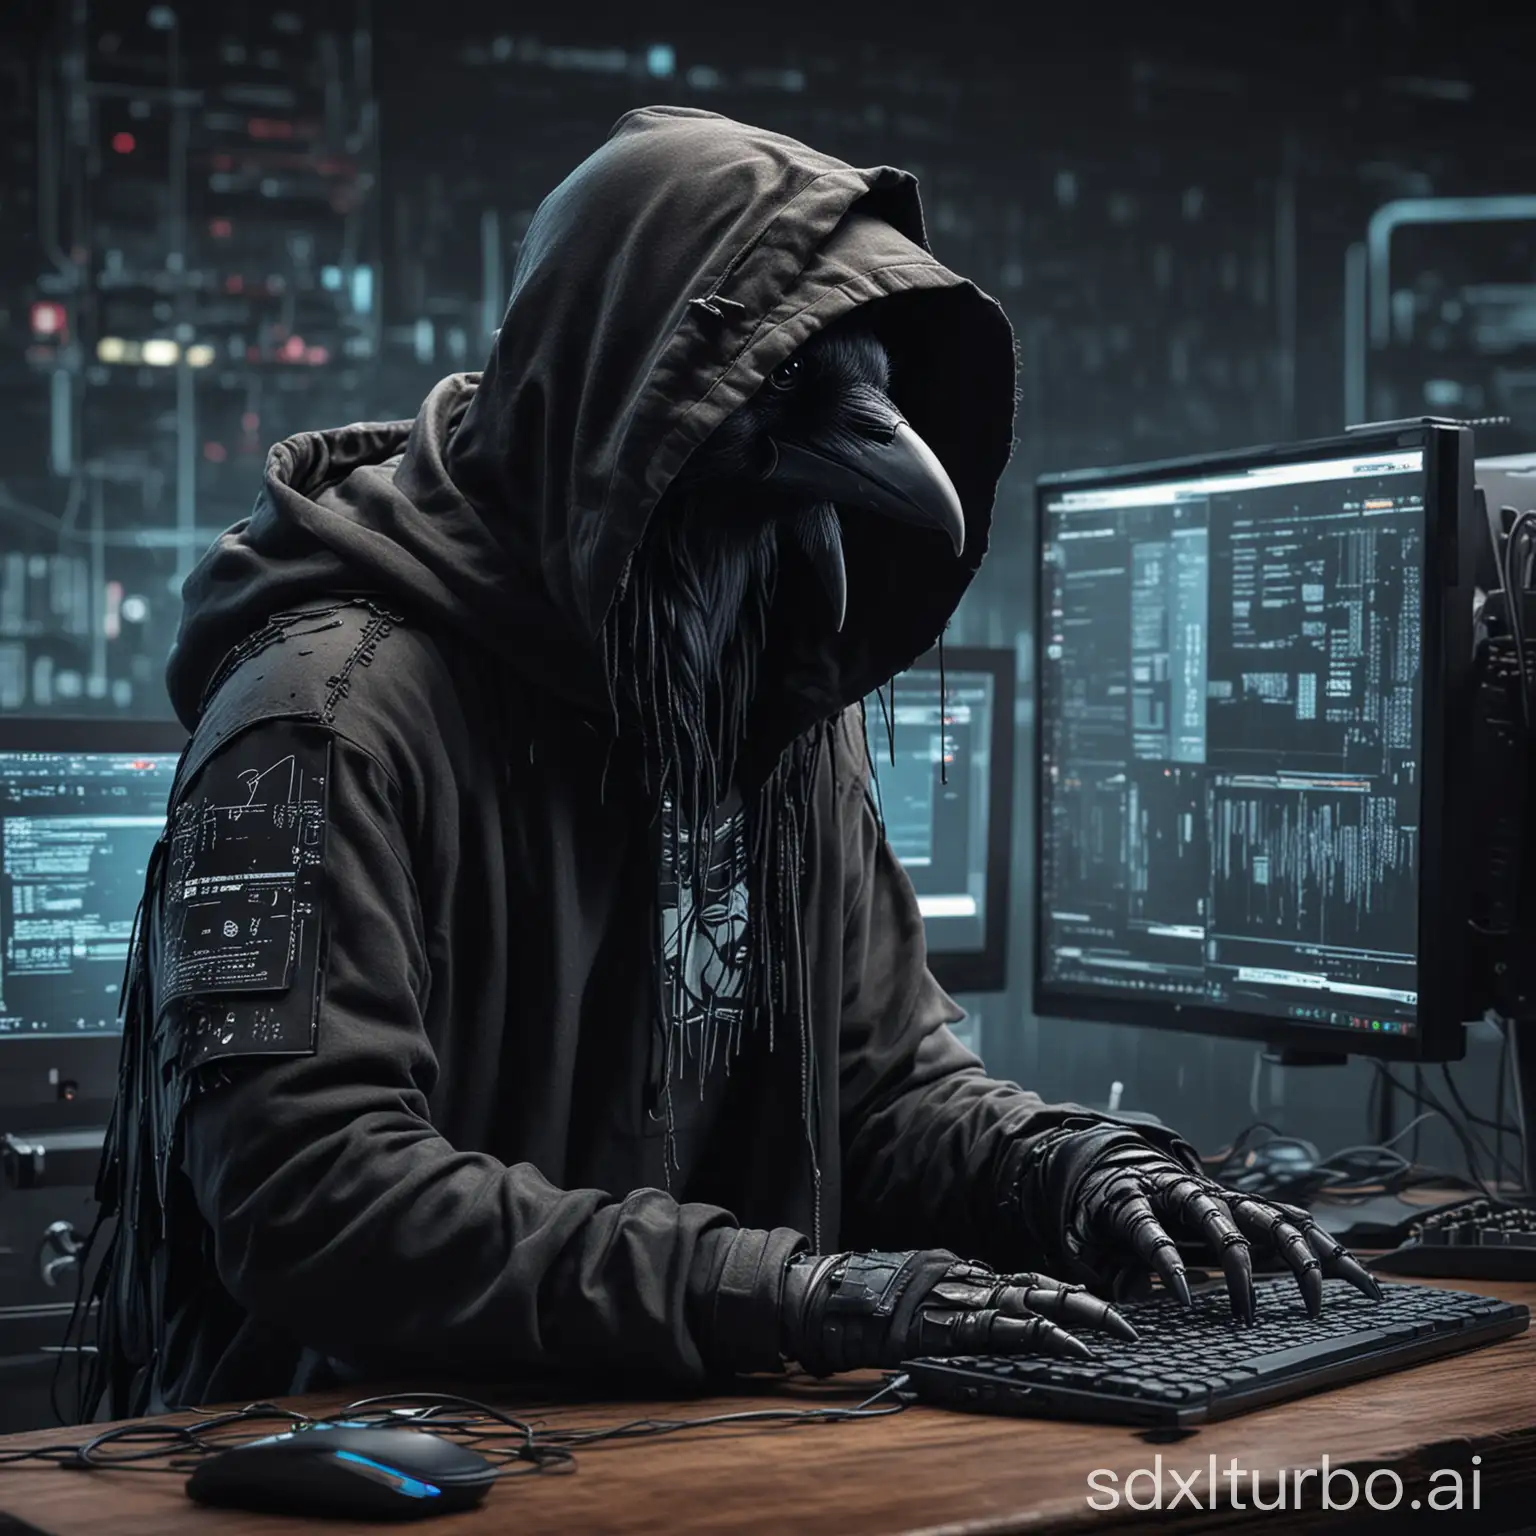 Cyberpunk-Crow-Hacker-with-Laptop-Surrounded-by-Monitors-and-Keyboards